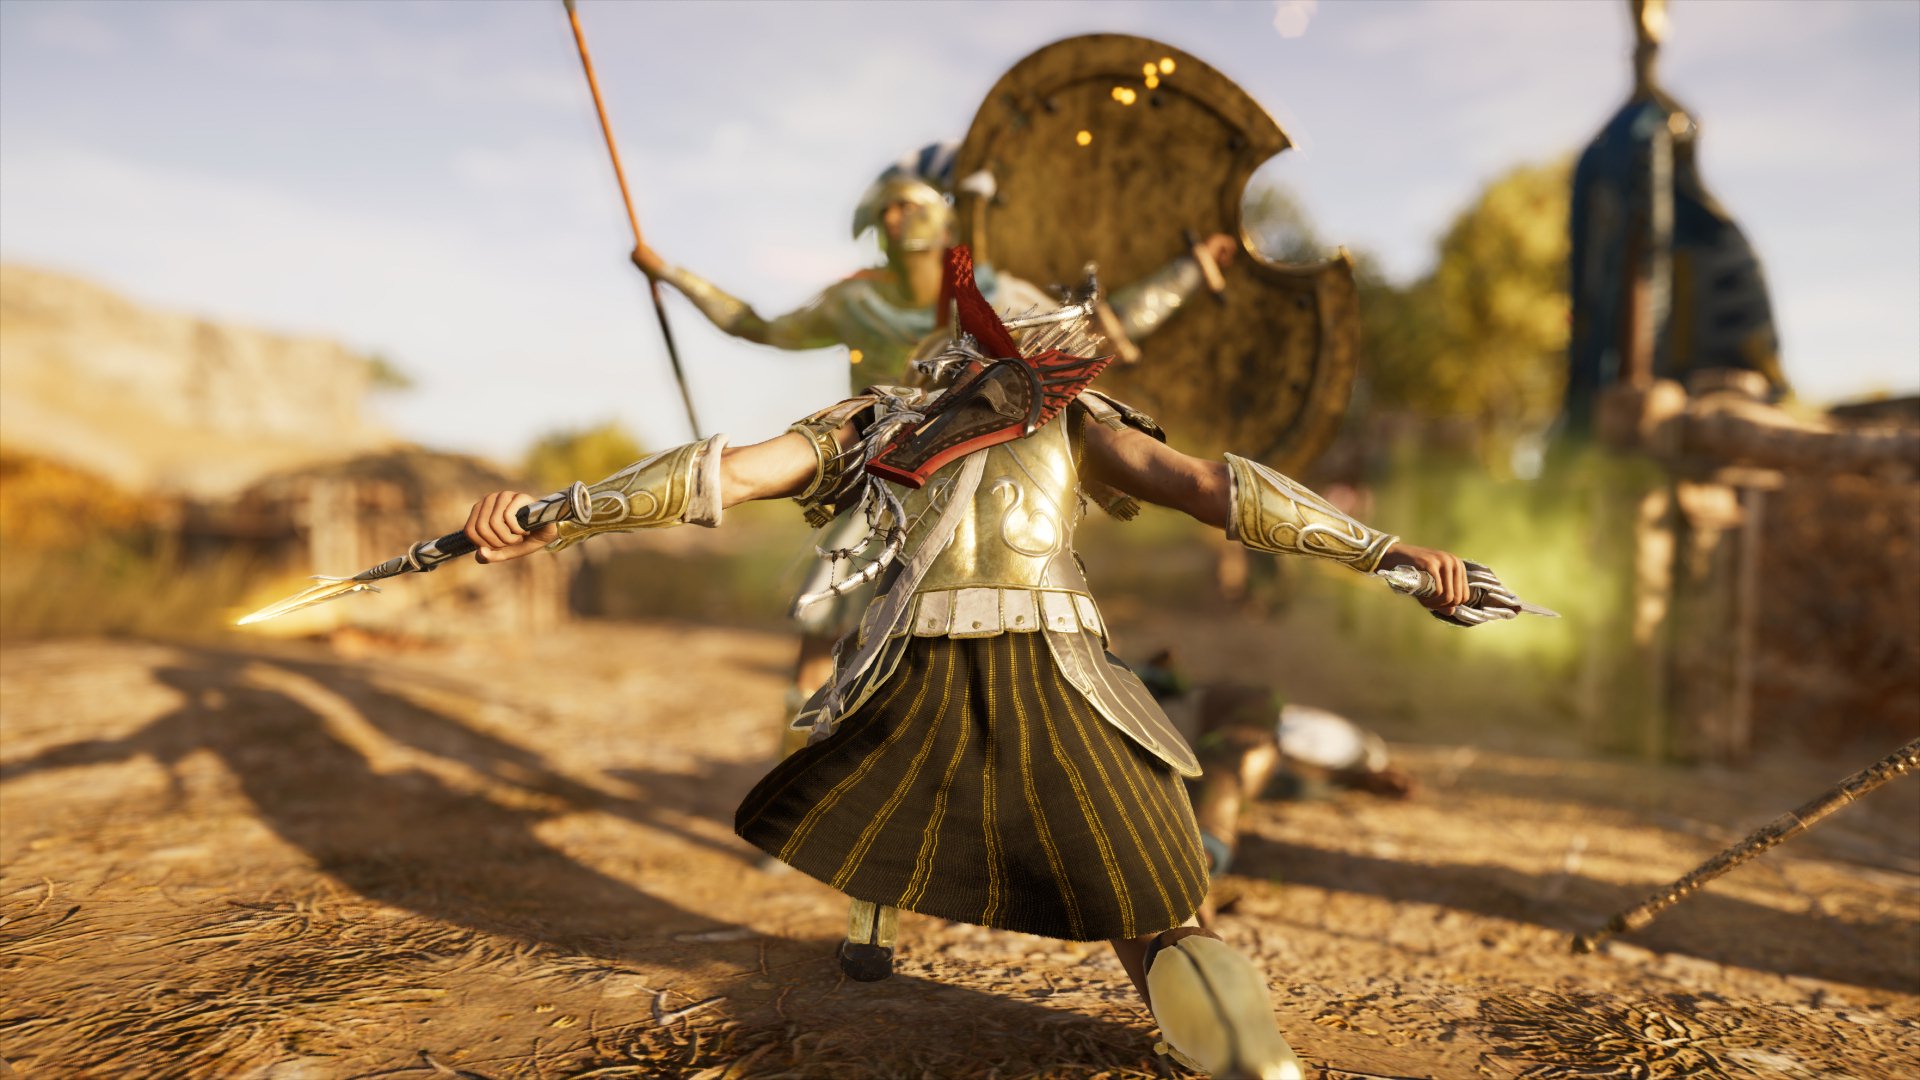 General 1920x1080 Assassin's Creed video games screen shot Assassin's Creed: Odyssey Ubisoft video game characters